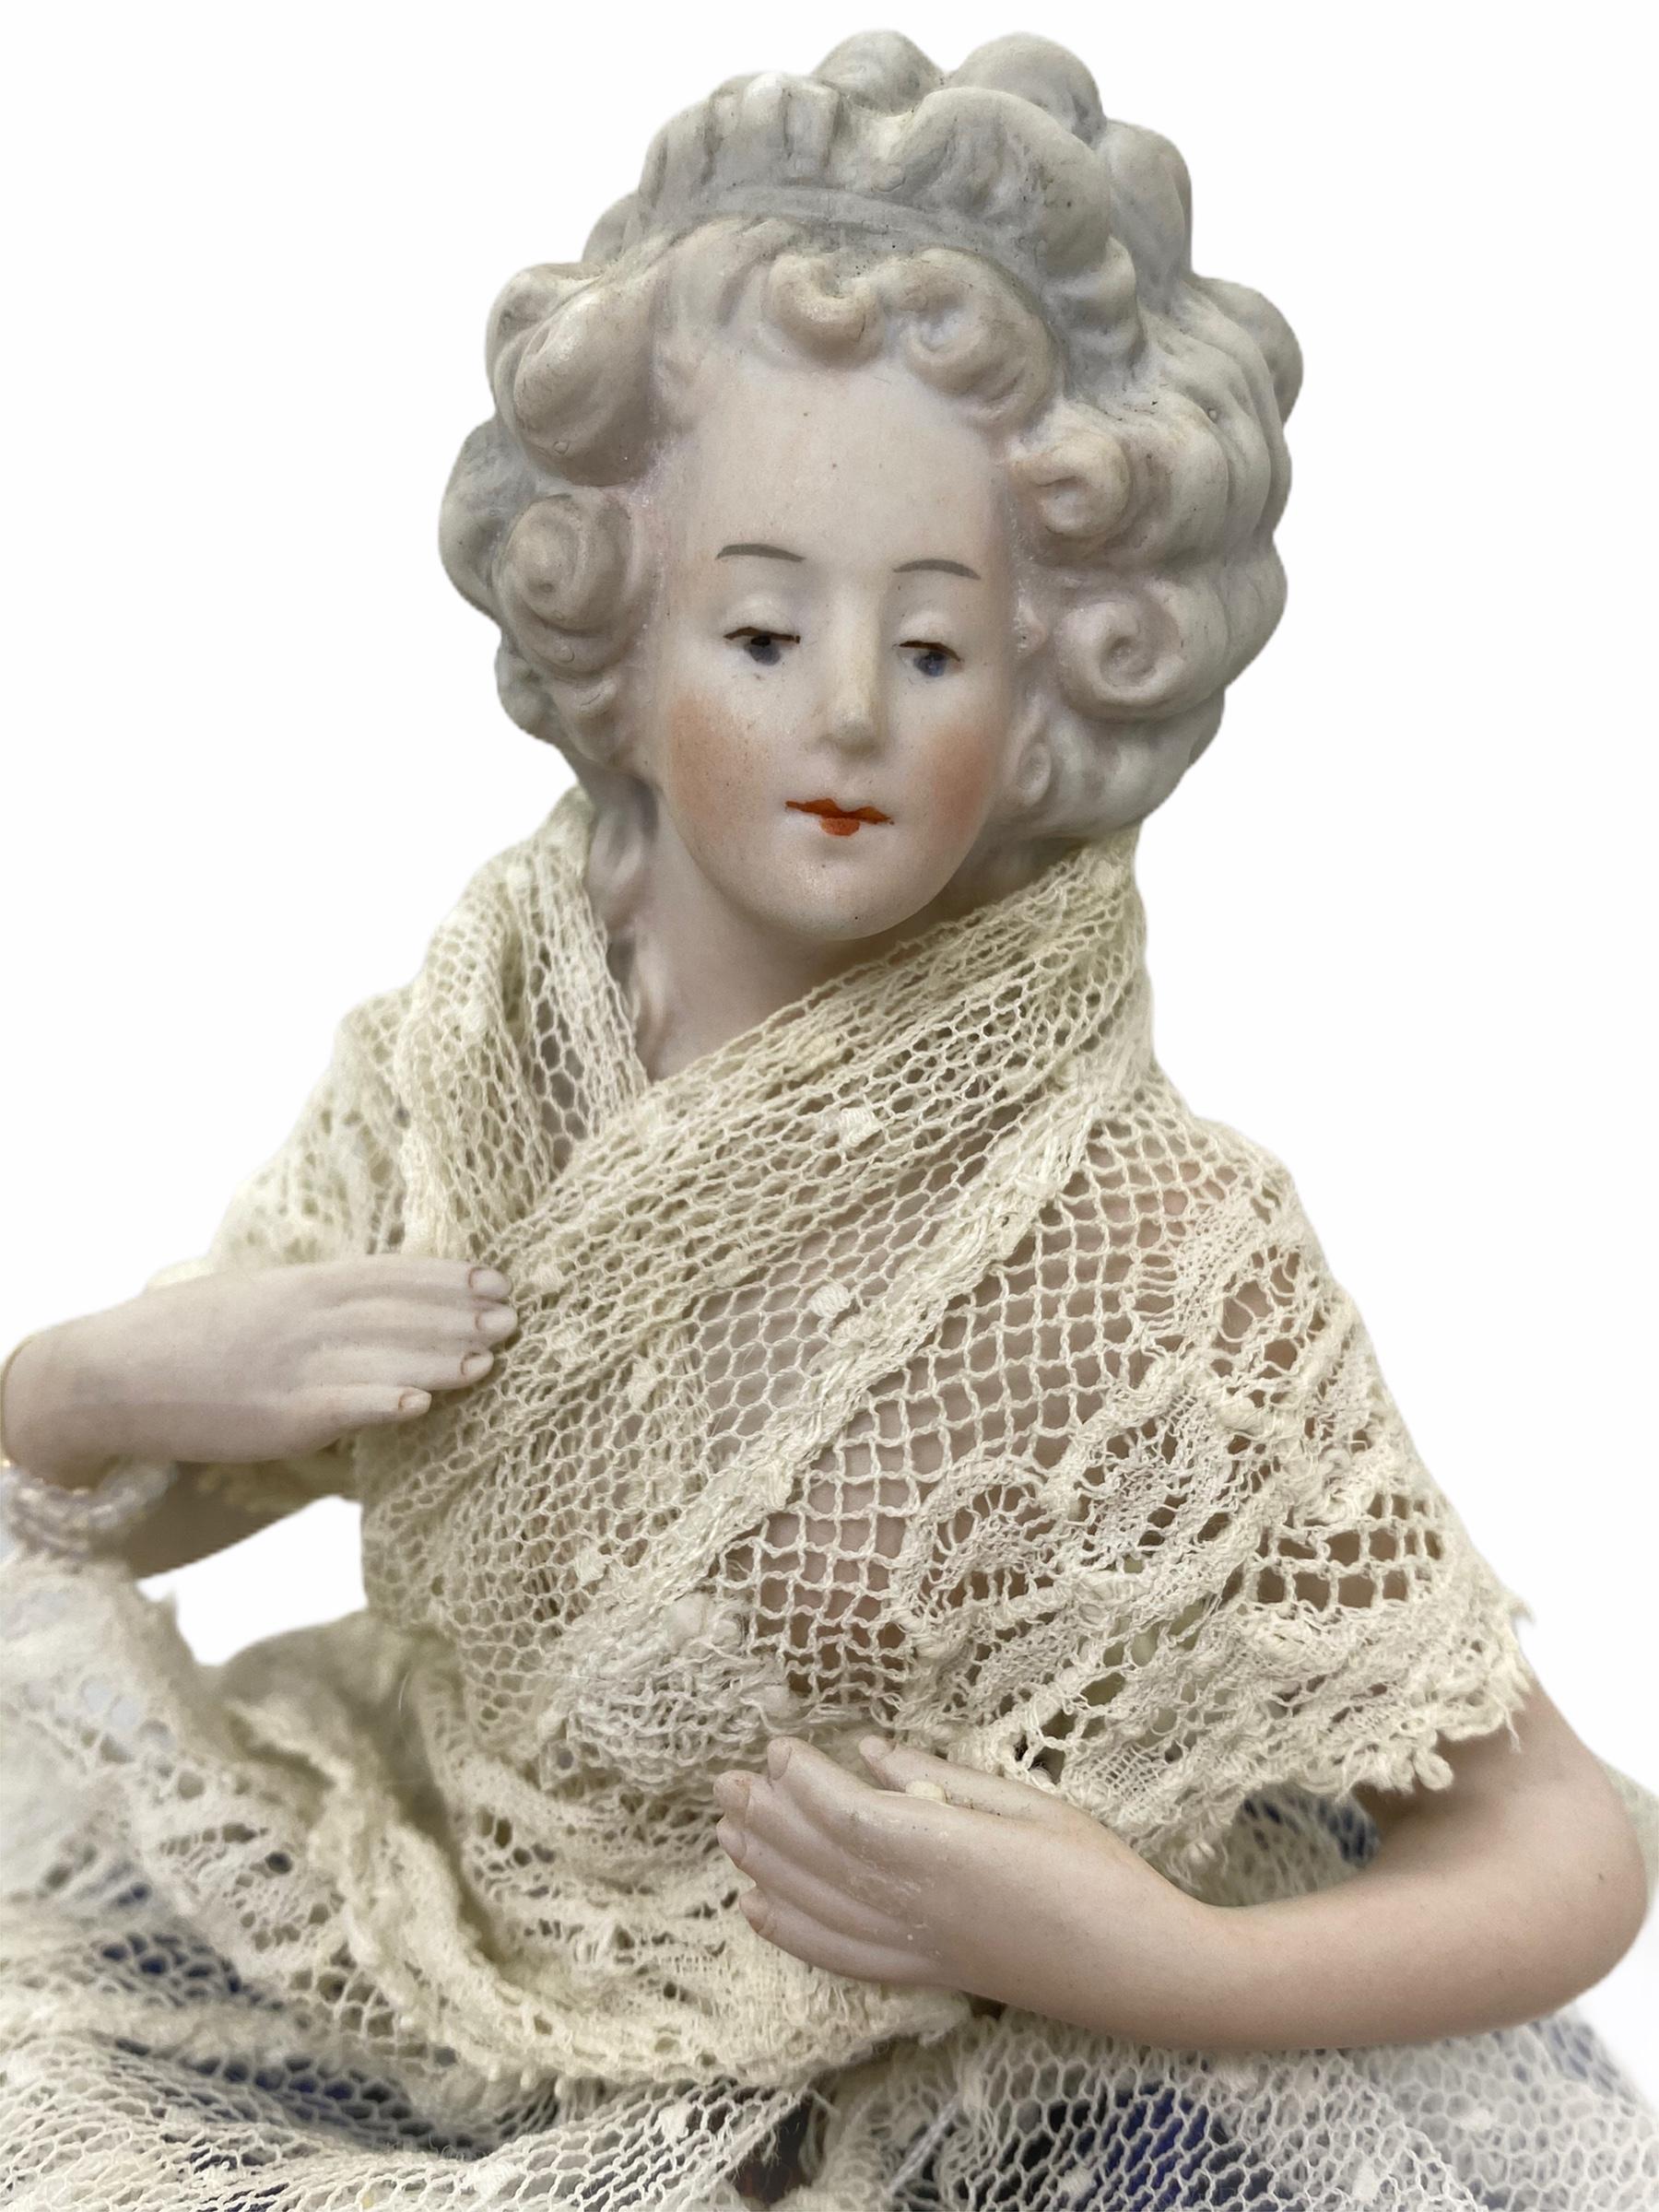 A petite antique German half doll with original lace dress on wire base.
She is holding the hand away. It is marked with mold number 7125/5.
It is in very good condition with no chips cracks or restorations.